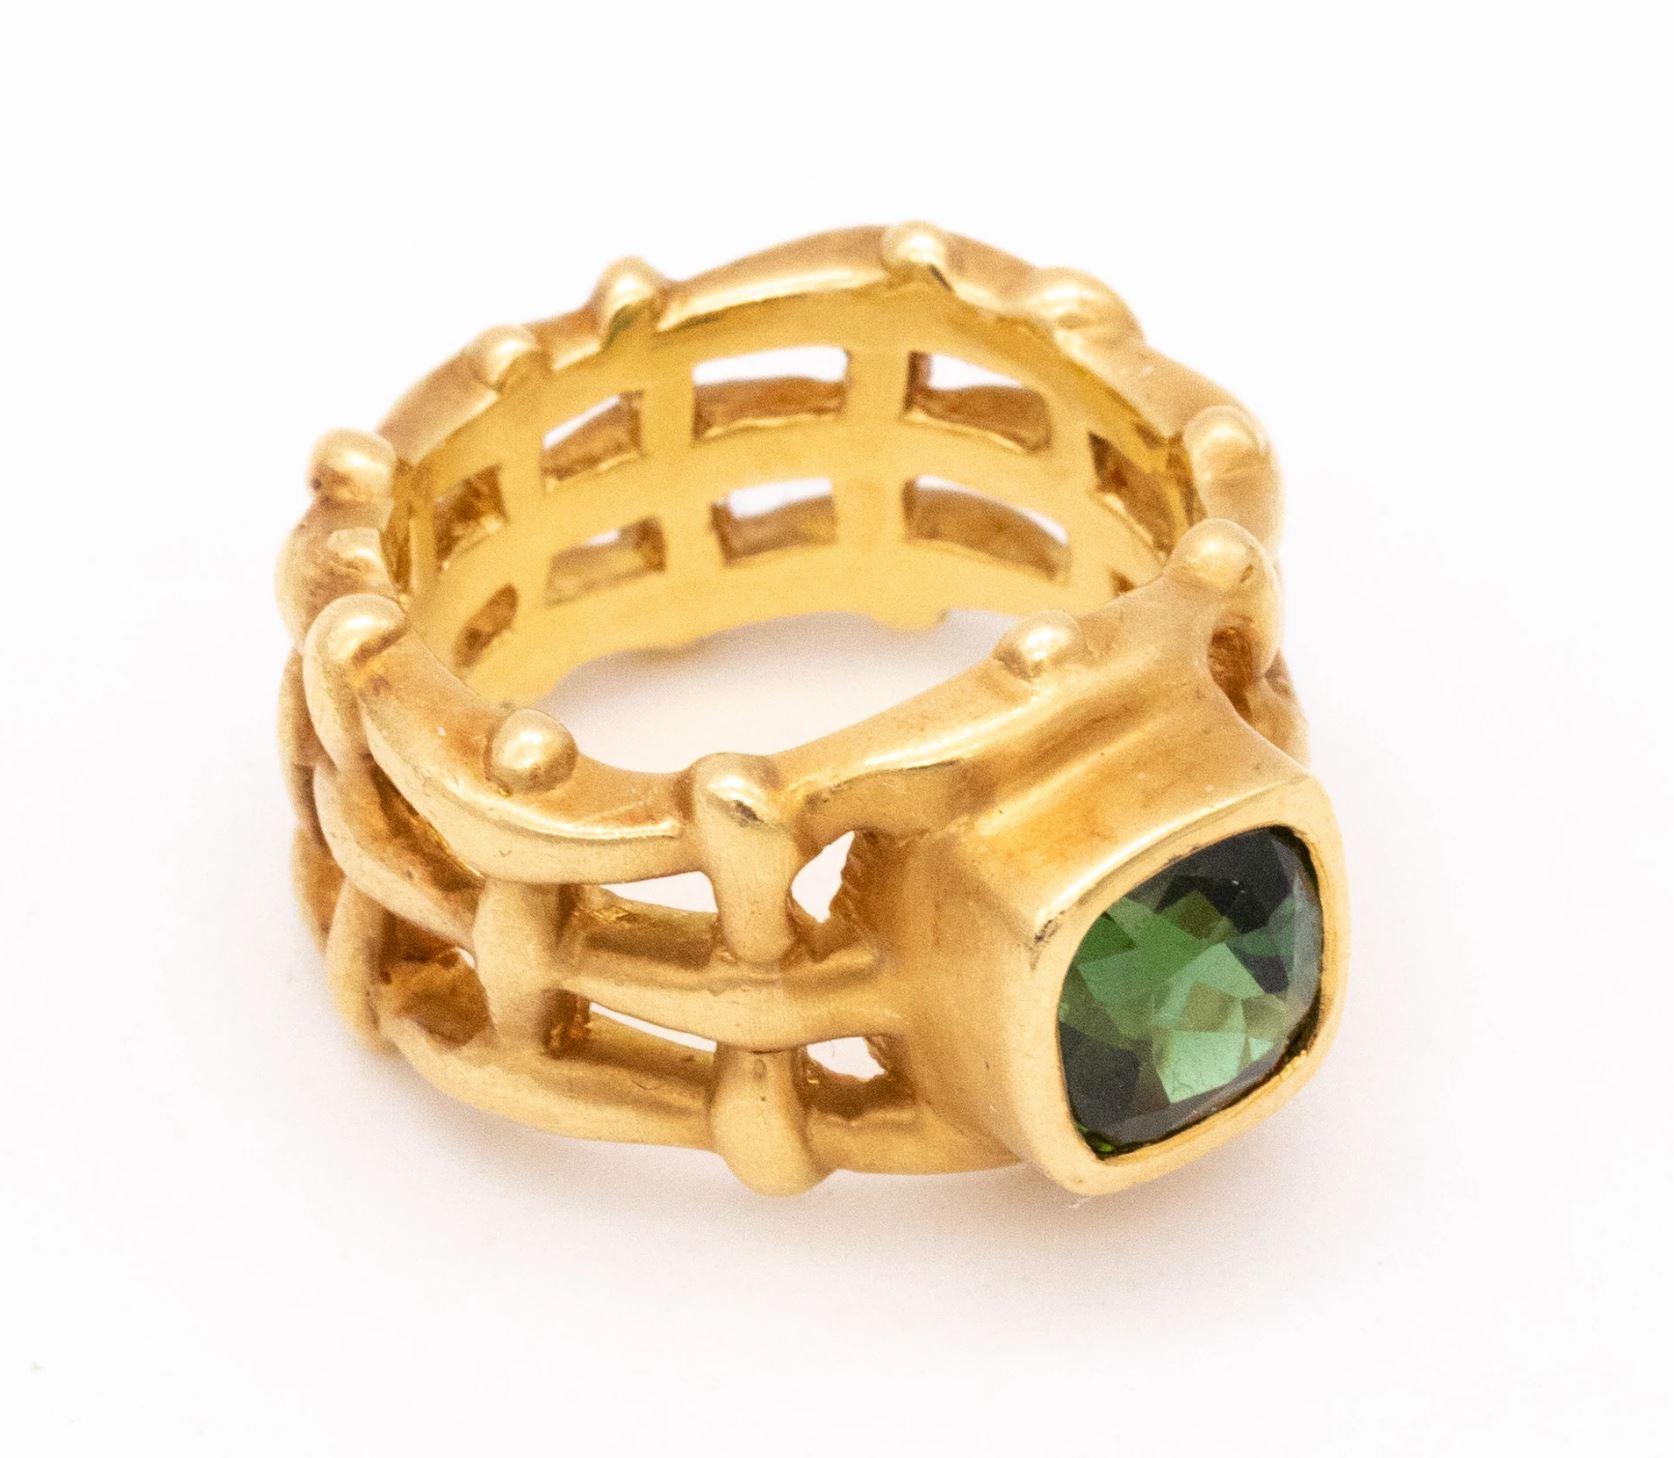 Modernist Angela Cummings Studios Rare Cocktail Ring 18Kt Yellow Gold 2.13 Cts Tourmaline For Sale